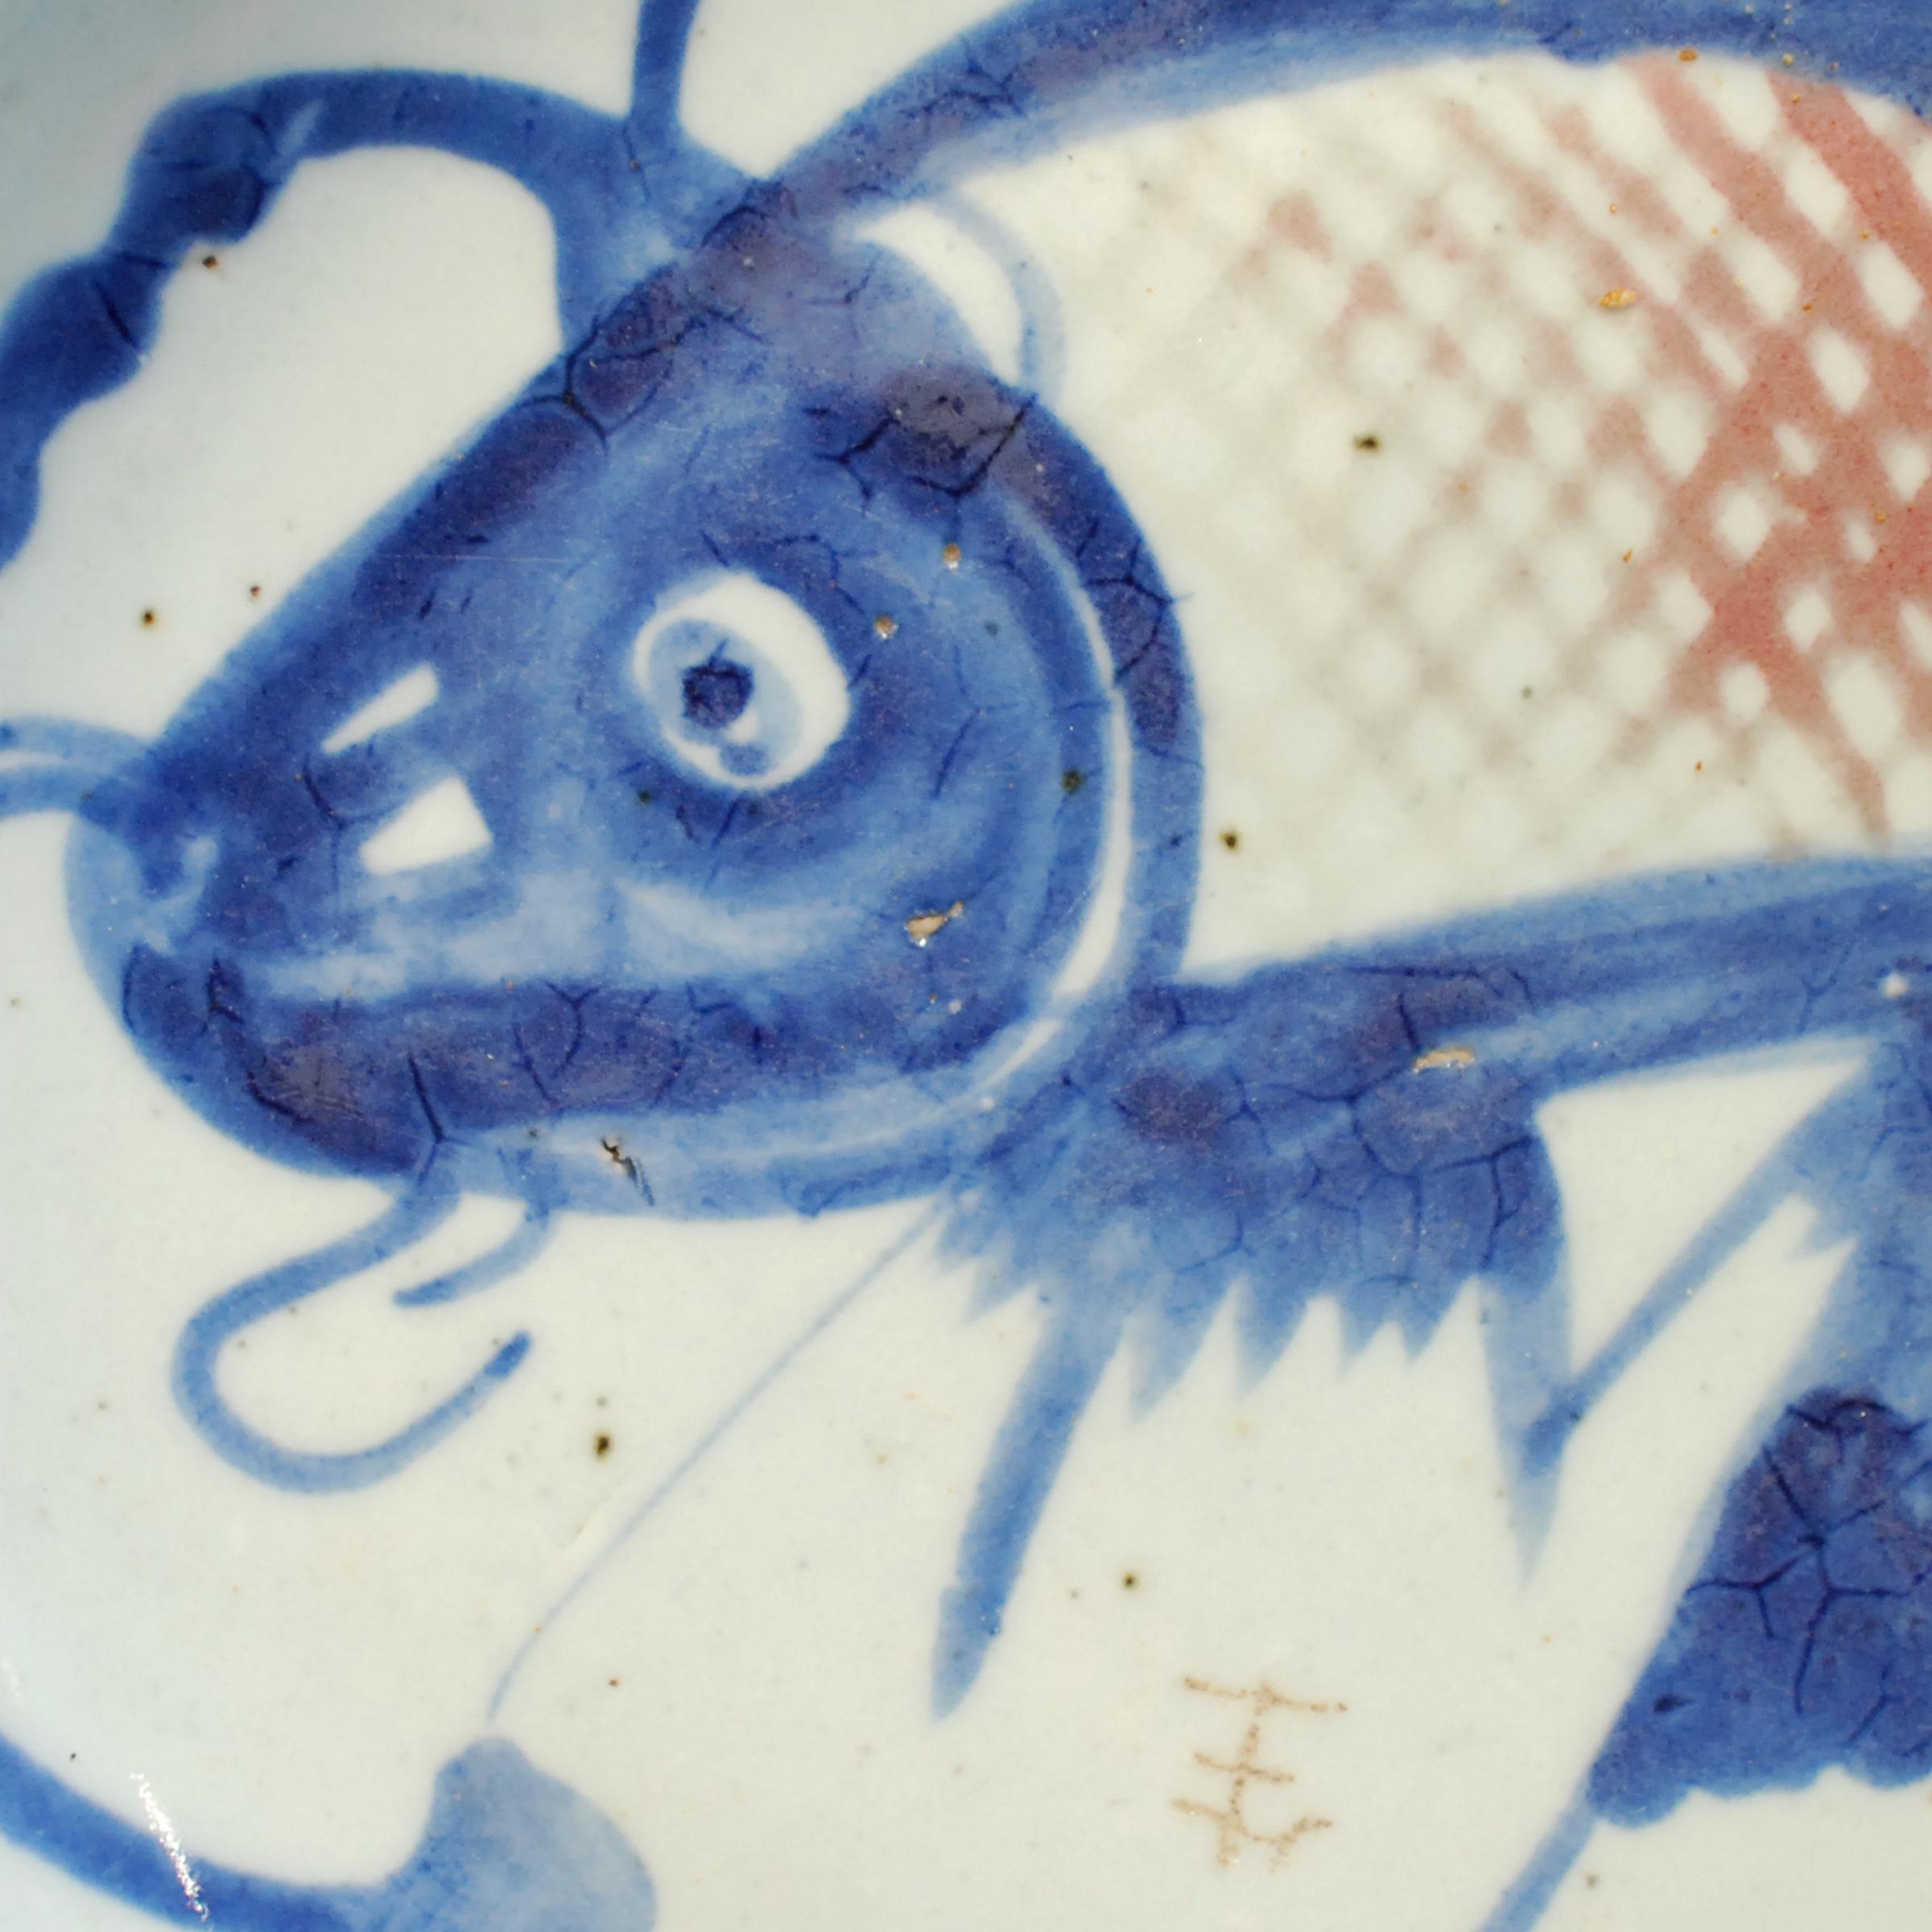 The fish on this hand painted 19th century provincial plate represents a blessing for wealth. Chinese symbols take on added meaning and nuance when combined with other motifs. The blue lines around the fish suggest water, which together would offer